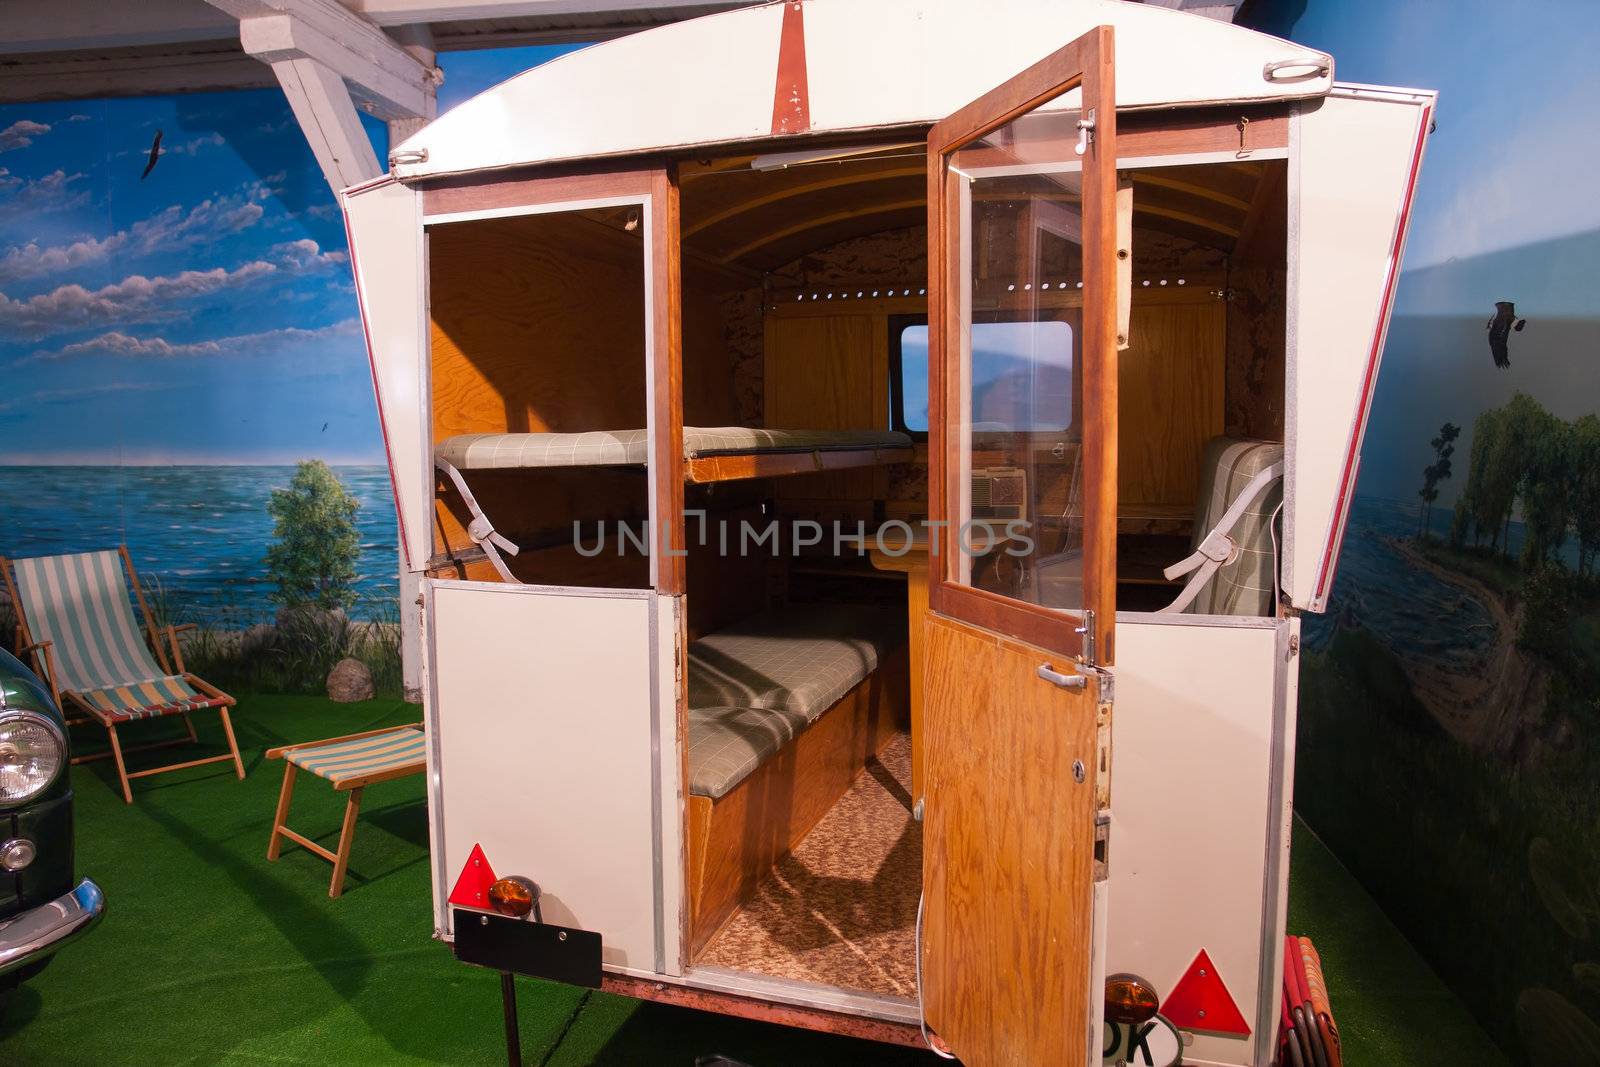 Vintage classical camper caravan by Ronyzmbow